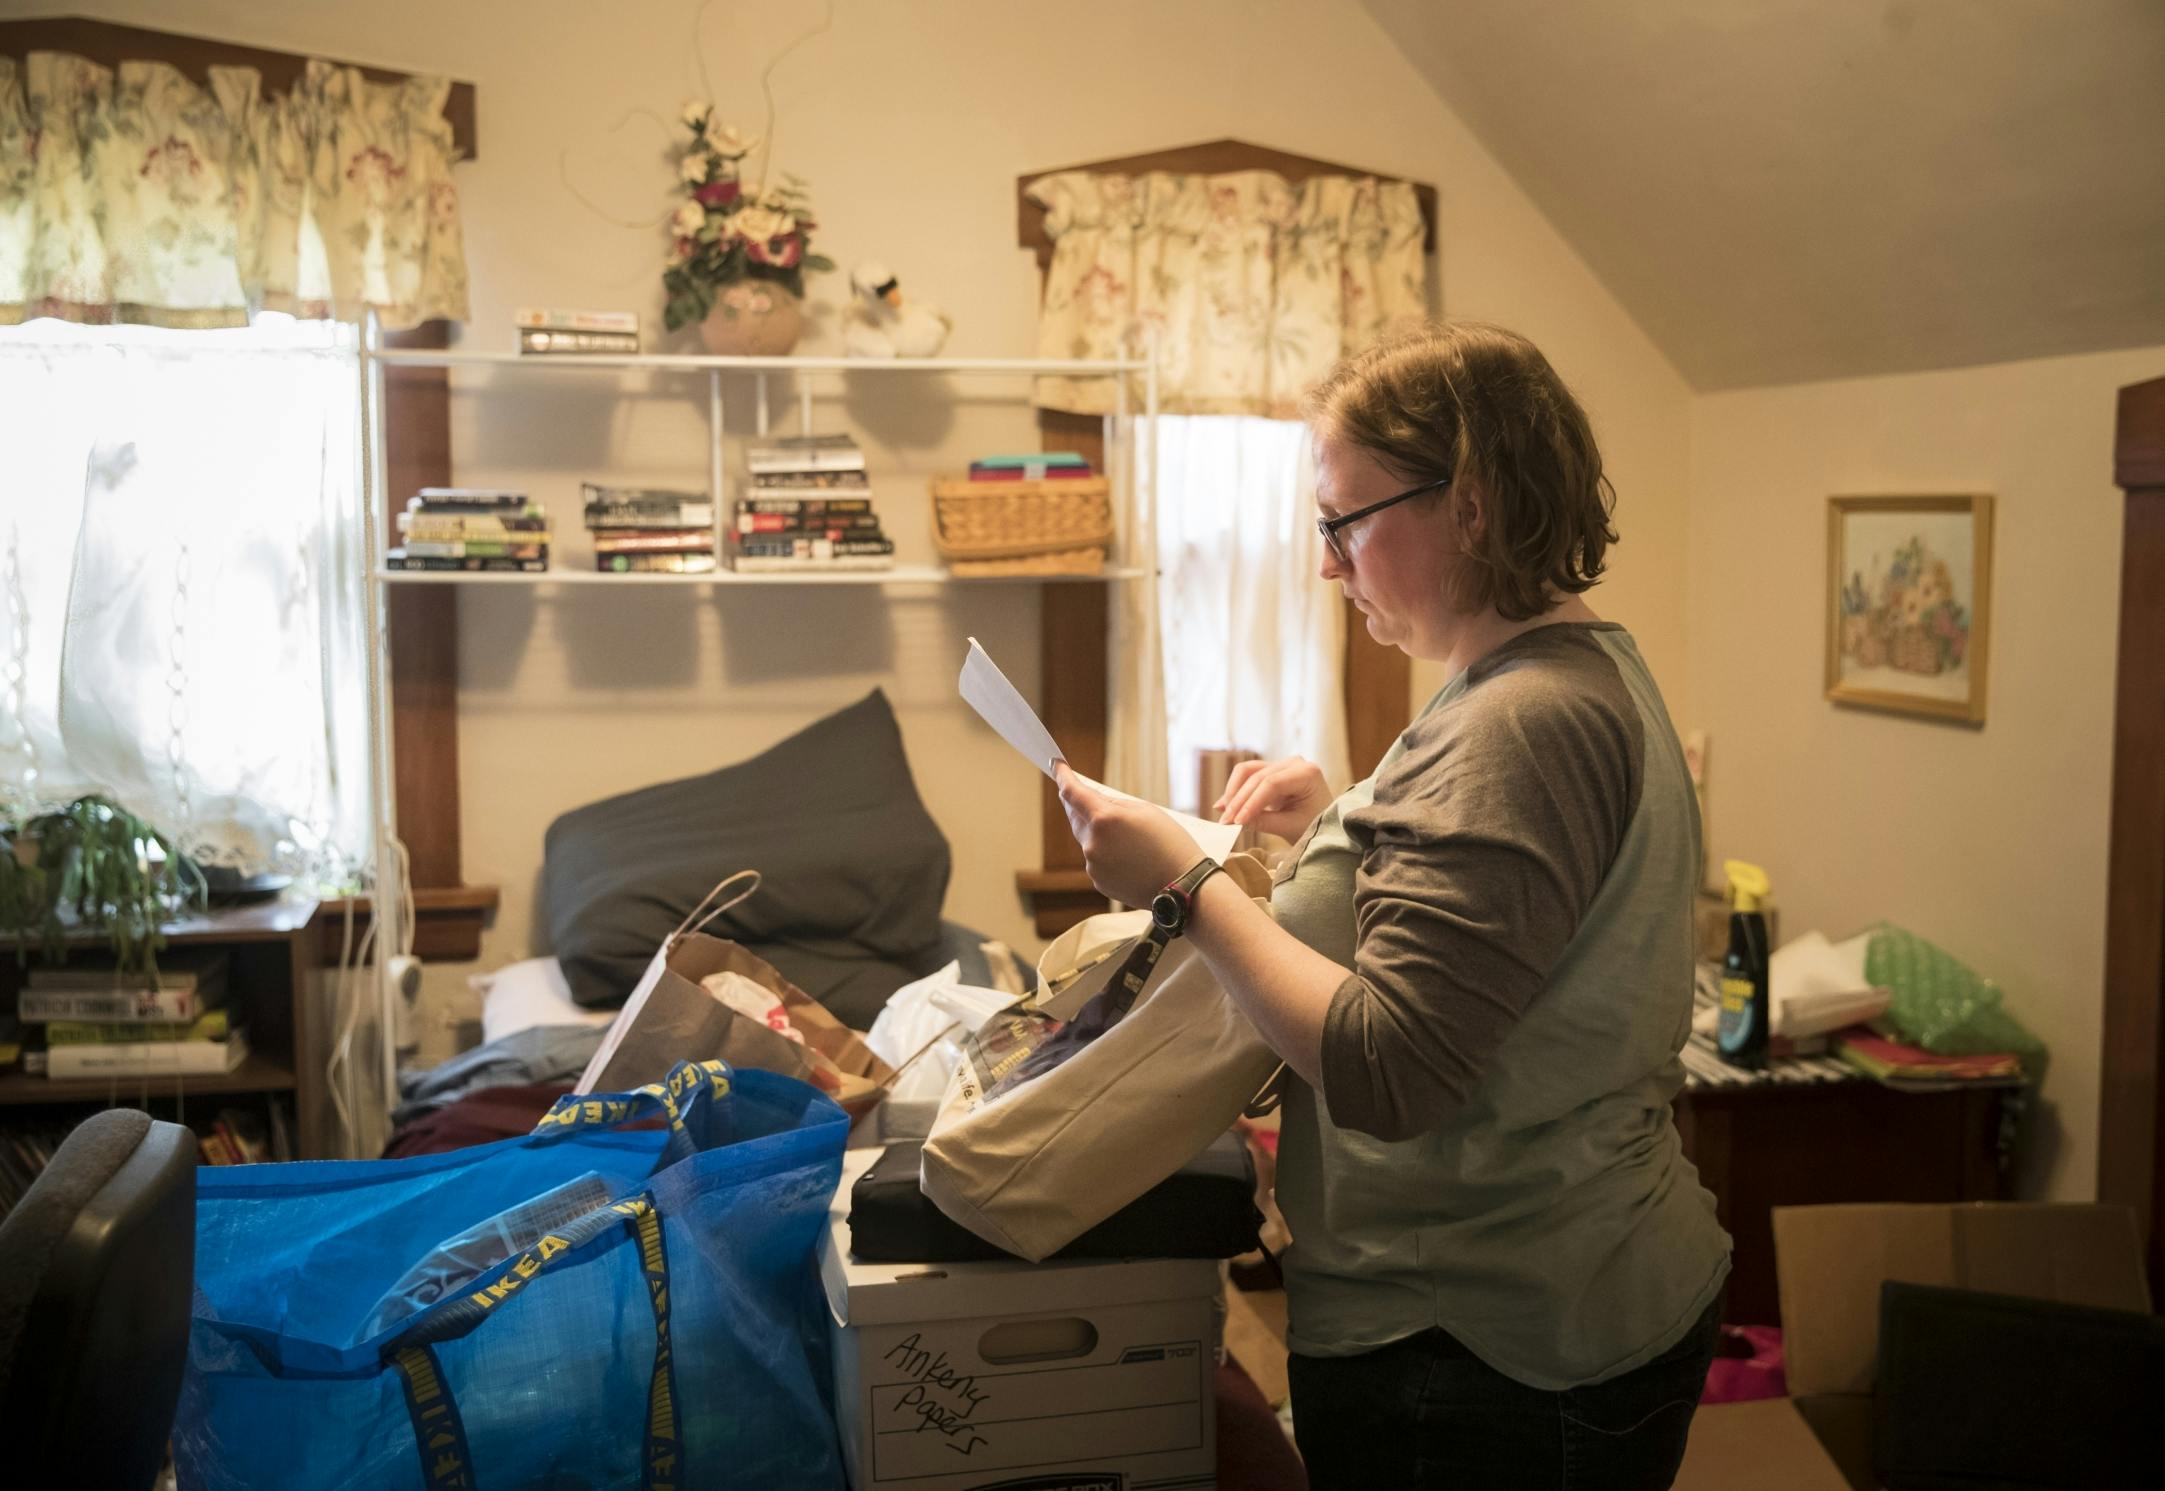 Angela Byrne packed up her mother's belongings at her home in Robbinsdale. Byrne lived with and cared for her mom during her cancer treatments; she died in February. Byrne said her bosses were supportive, but workplace pressures were ever-present.